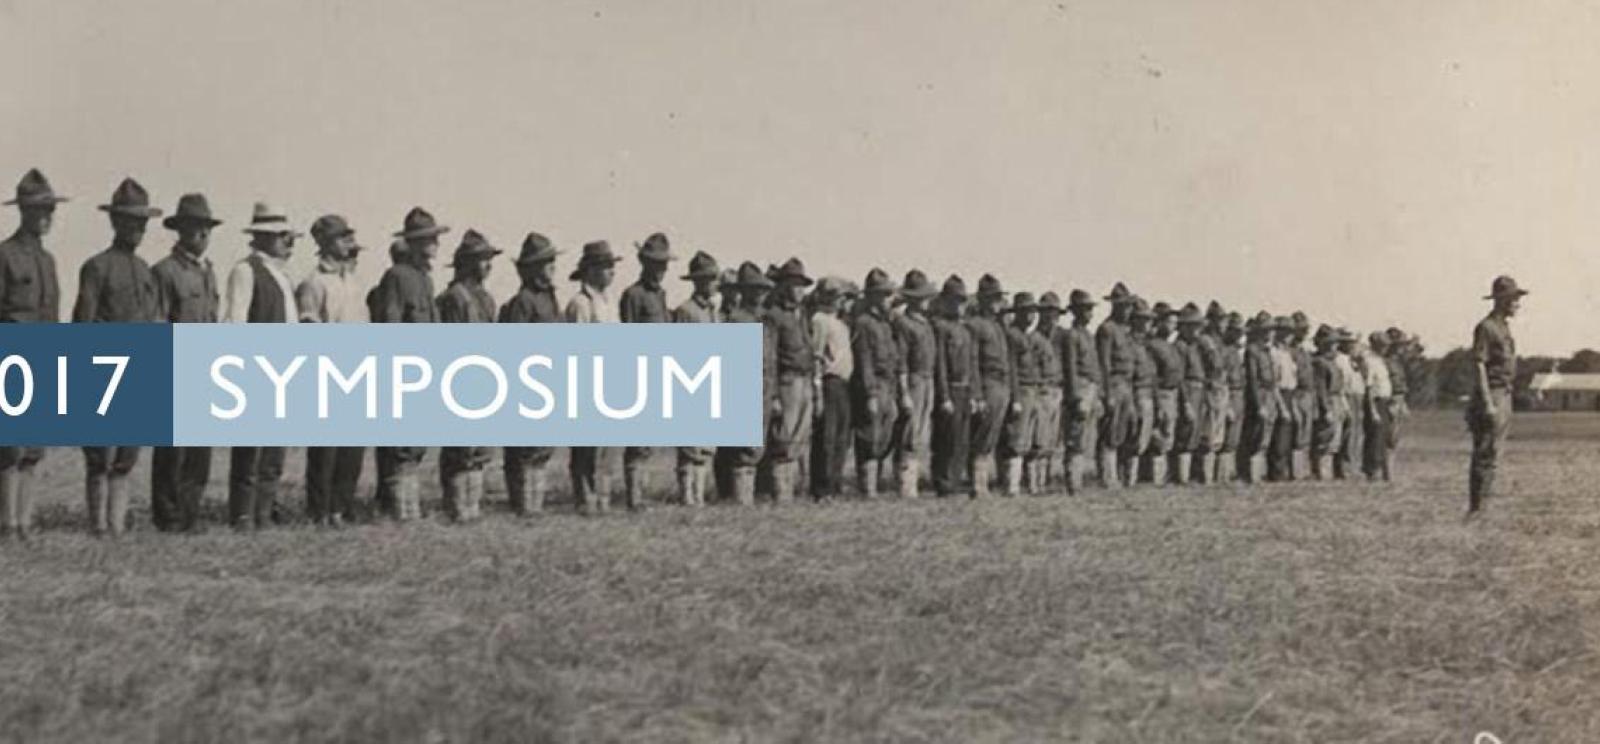 Background image: A line of soldiers in an empty field. Text: 2017 Symposium